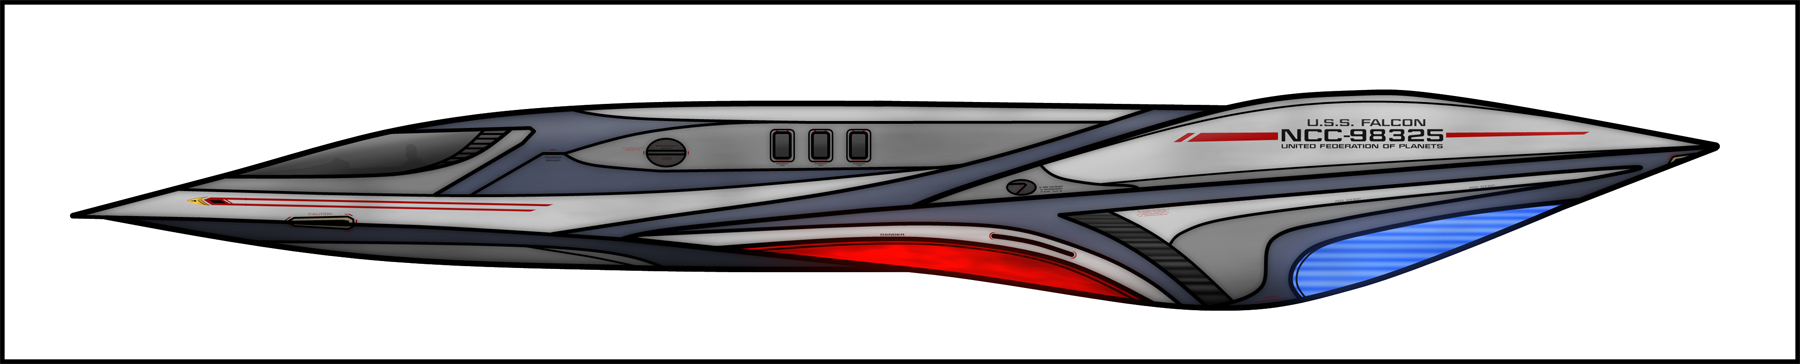 temepst_class_runabout_by_jetfreak74656-d51zy8o.png